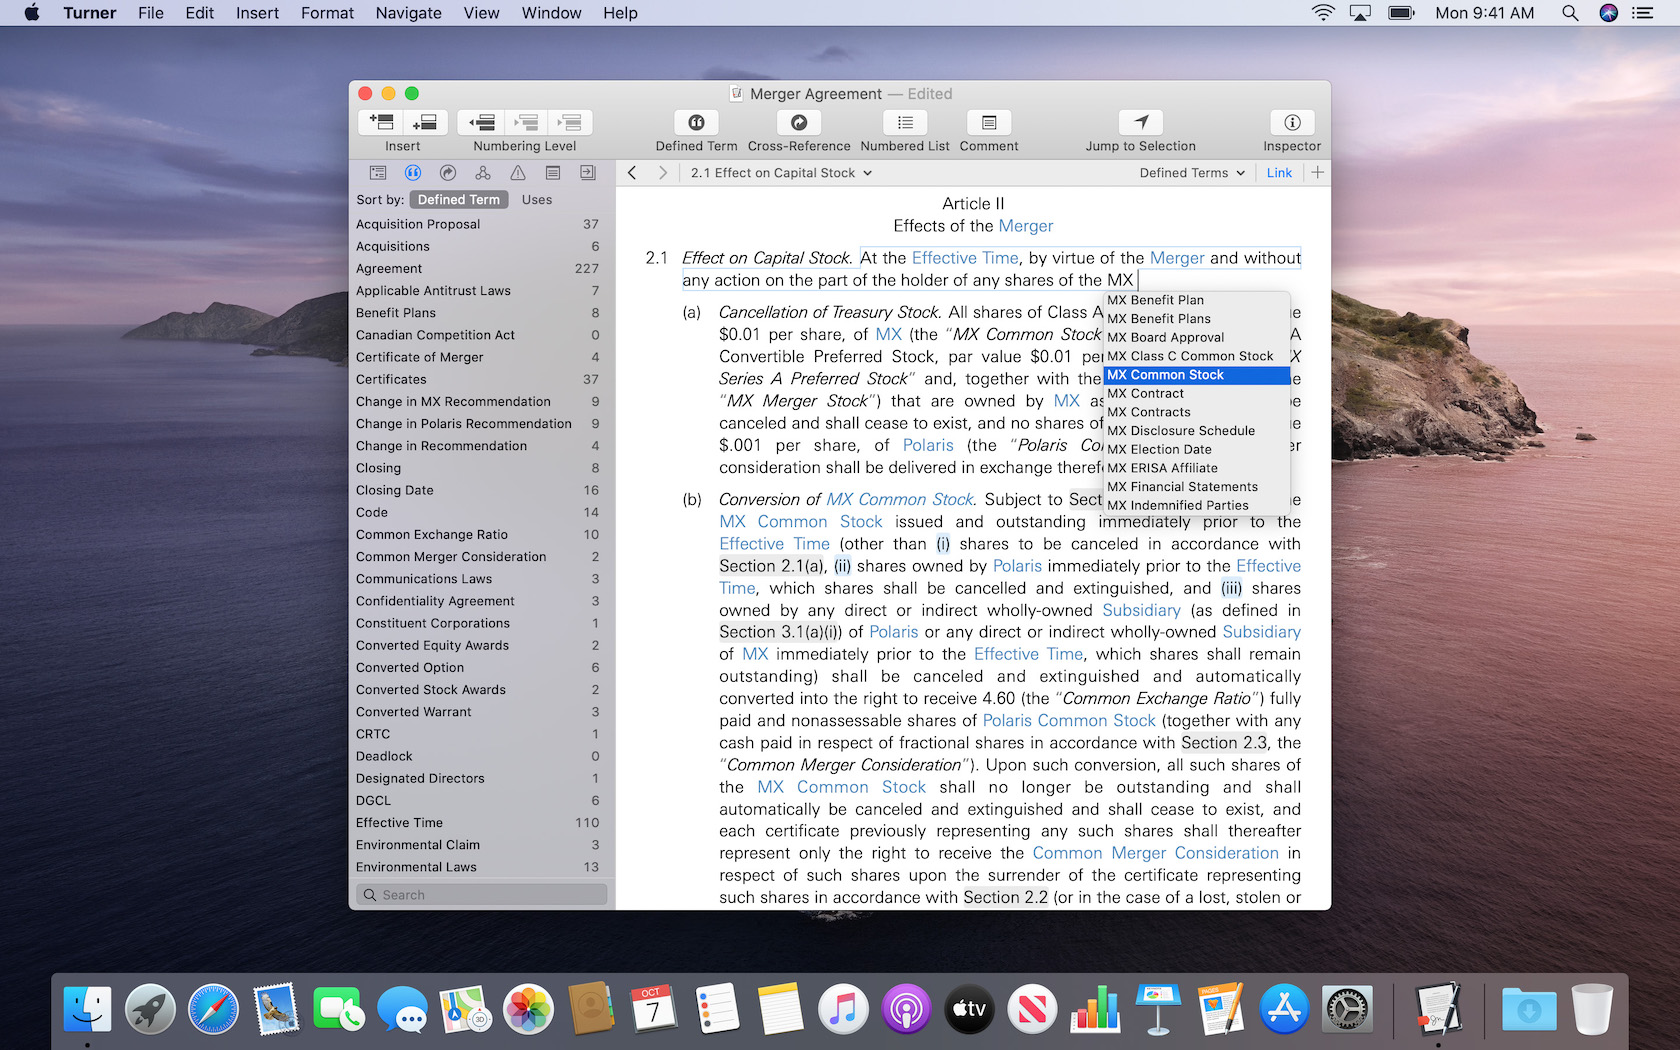 how to use riverpoint writer on word for mac 2016